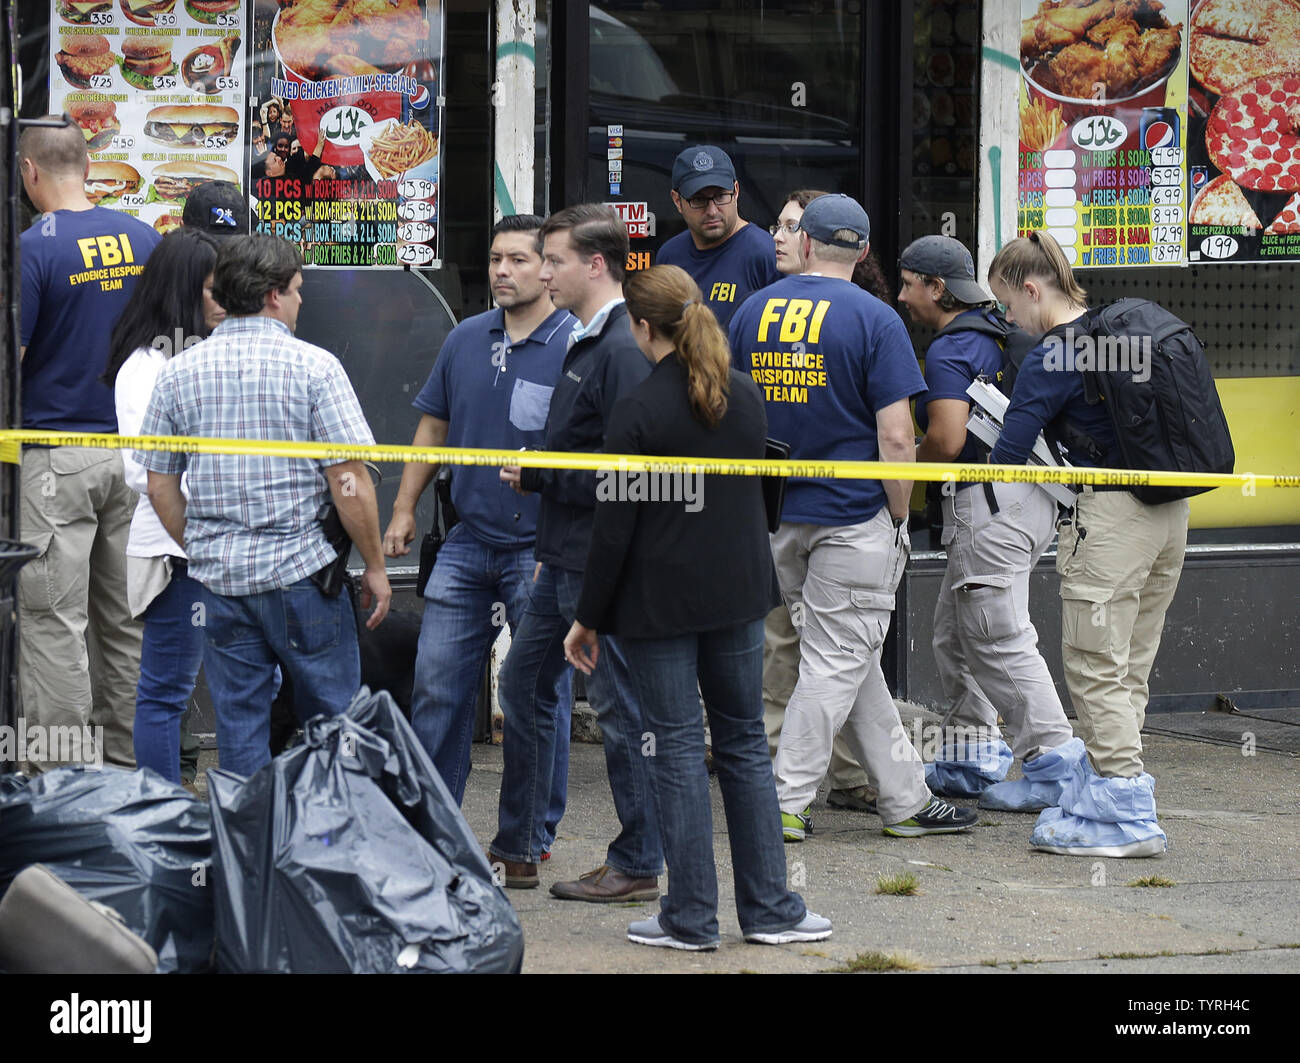 FBI investigators and police gather outside First American Fried Chicken after Ahmad Khan Rahami, the man responsible for the New York and New Jersey bombings, was apprehended by police on September 19, 2016 in Elizabeth, New Jersey. Two days before, an explosion from a bomb went off on West 23rd Street in Manhattan around 8:30 p.m. on Saturday, injuring 29 people on West 23rd Street in Manhattan. The man responsible for the explosion in Manhattan on Saturday night and an earlier bombing in New Jersey, Ahmad Khan Rahami, was taken into custody on Monday after he was wounded in a gunfight with Stock Photo